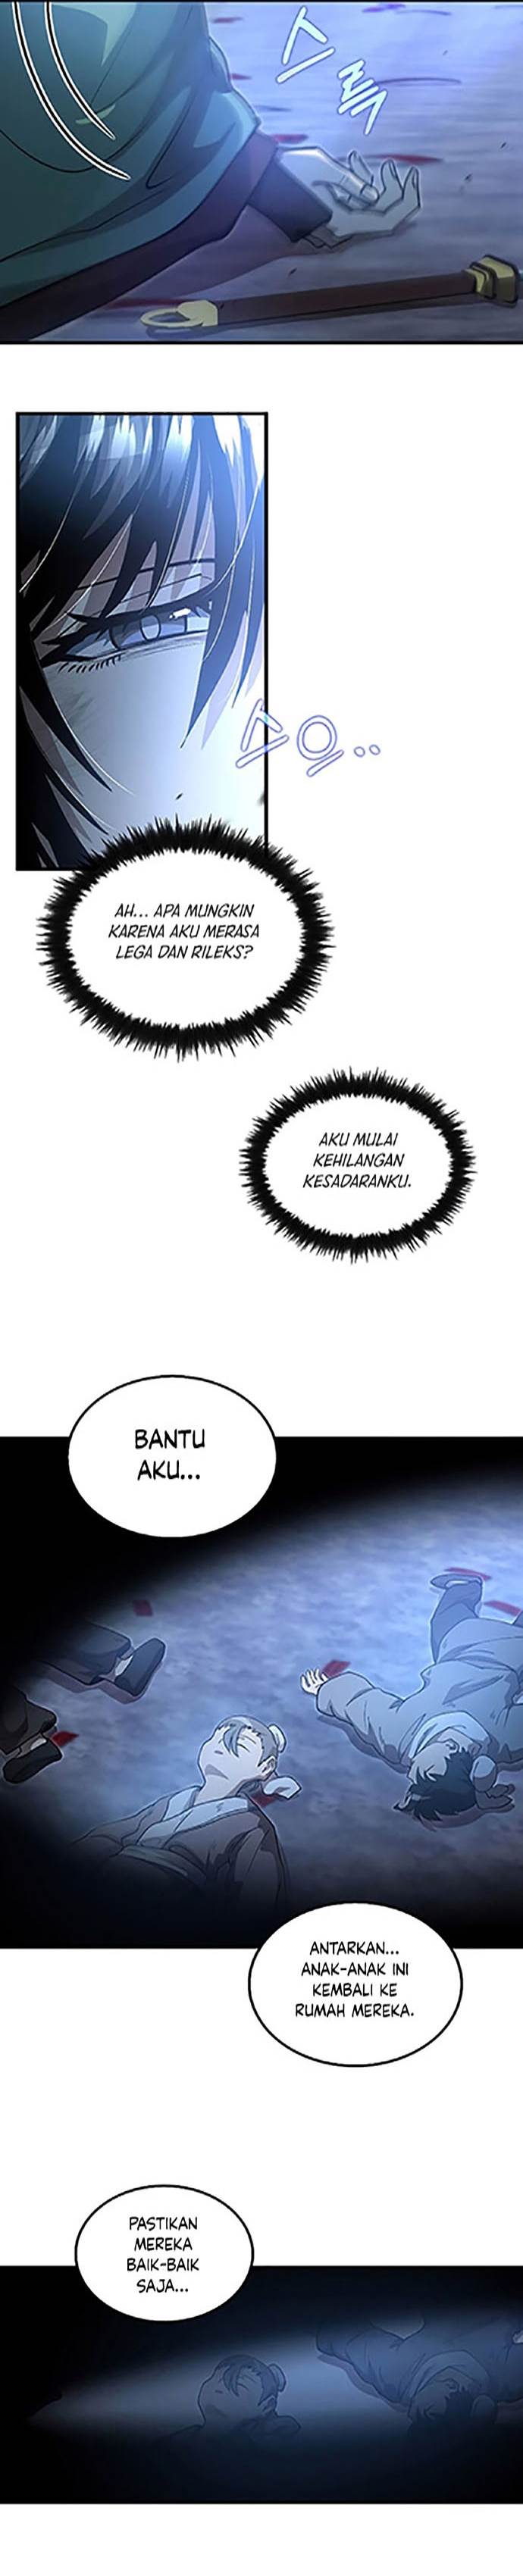 Doctor’s Rebirth Chapter 140